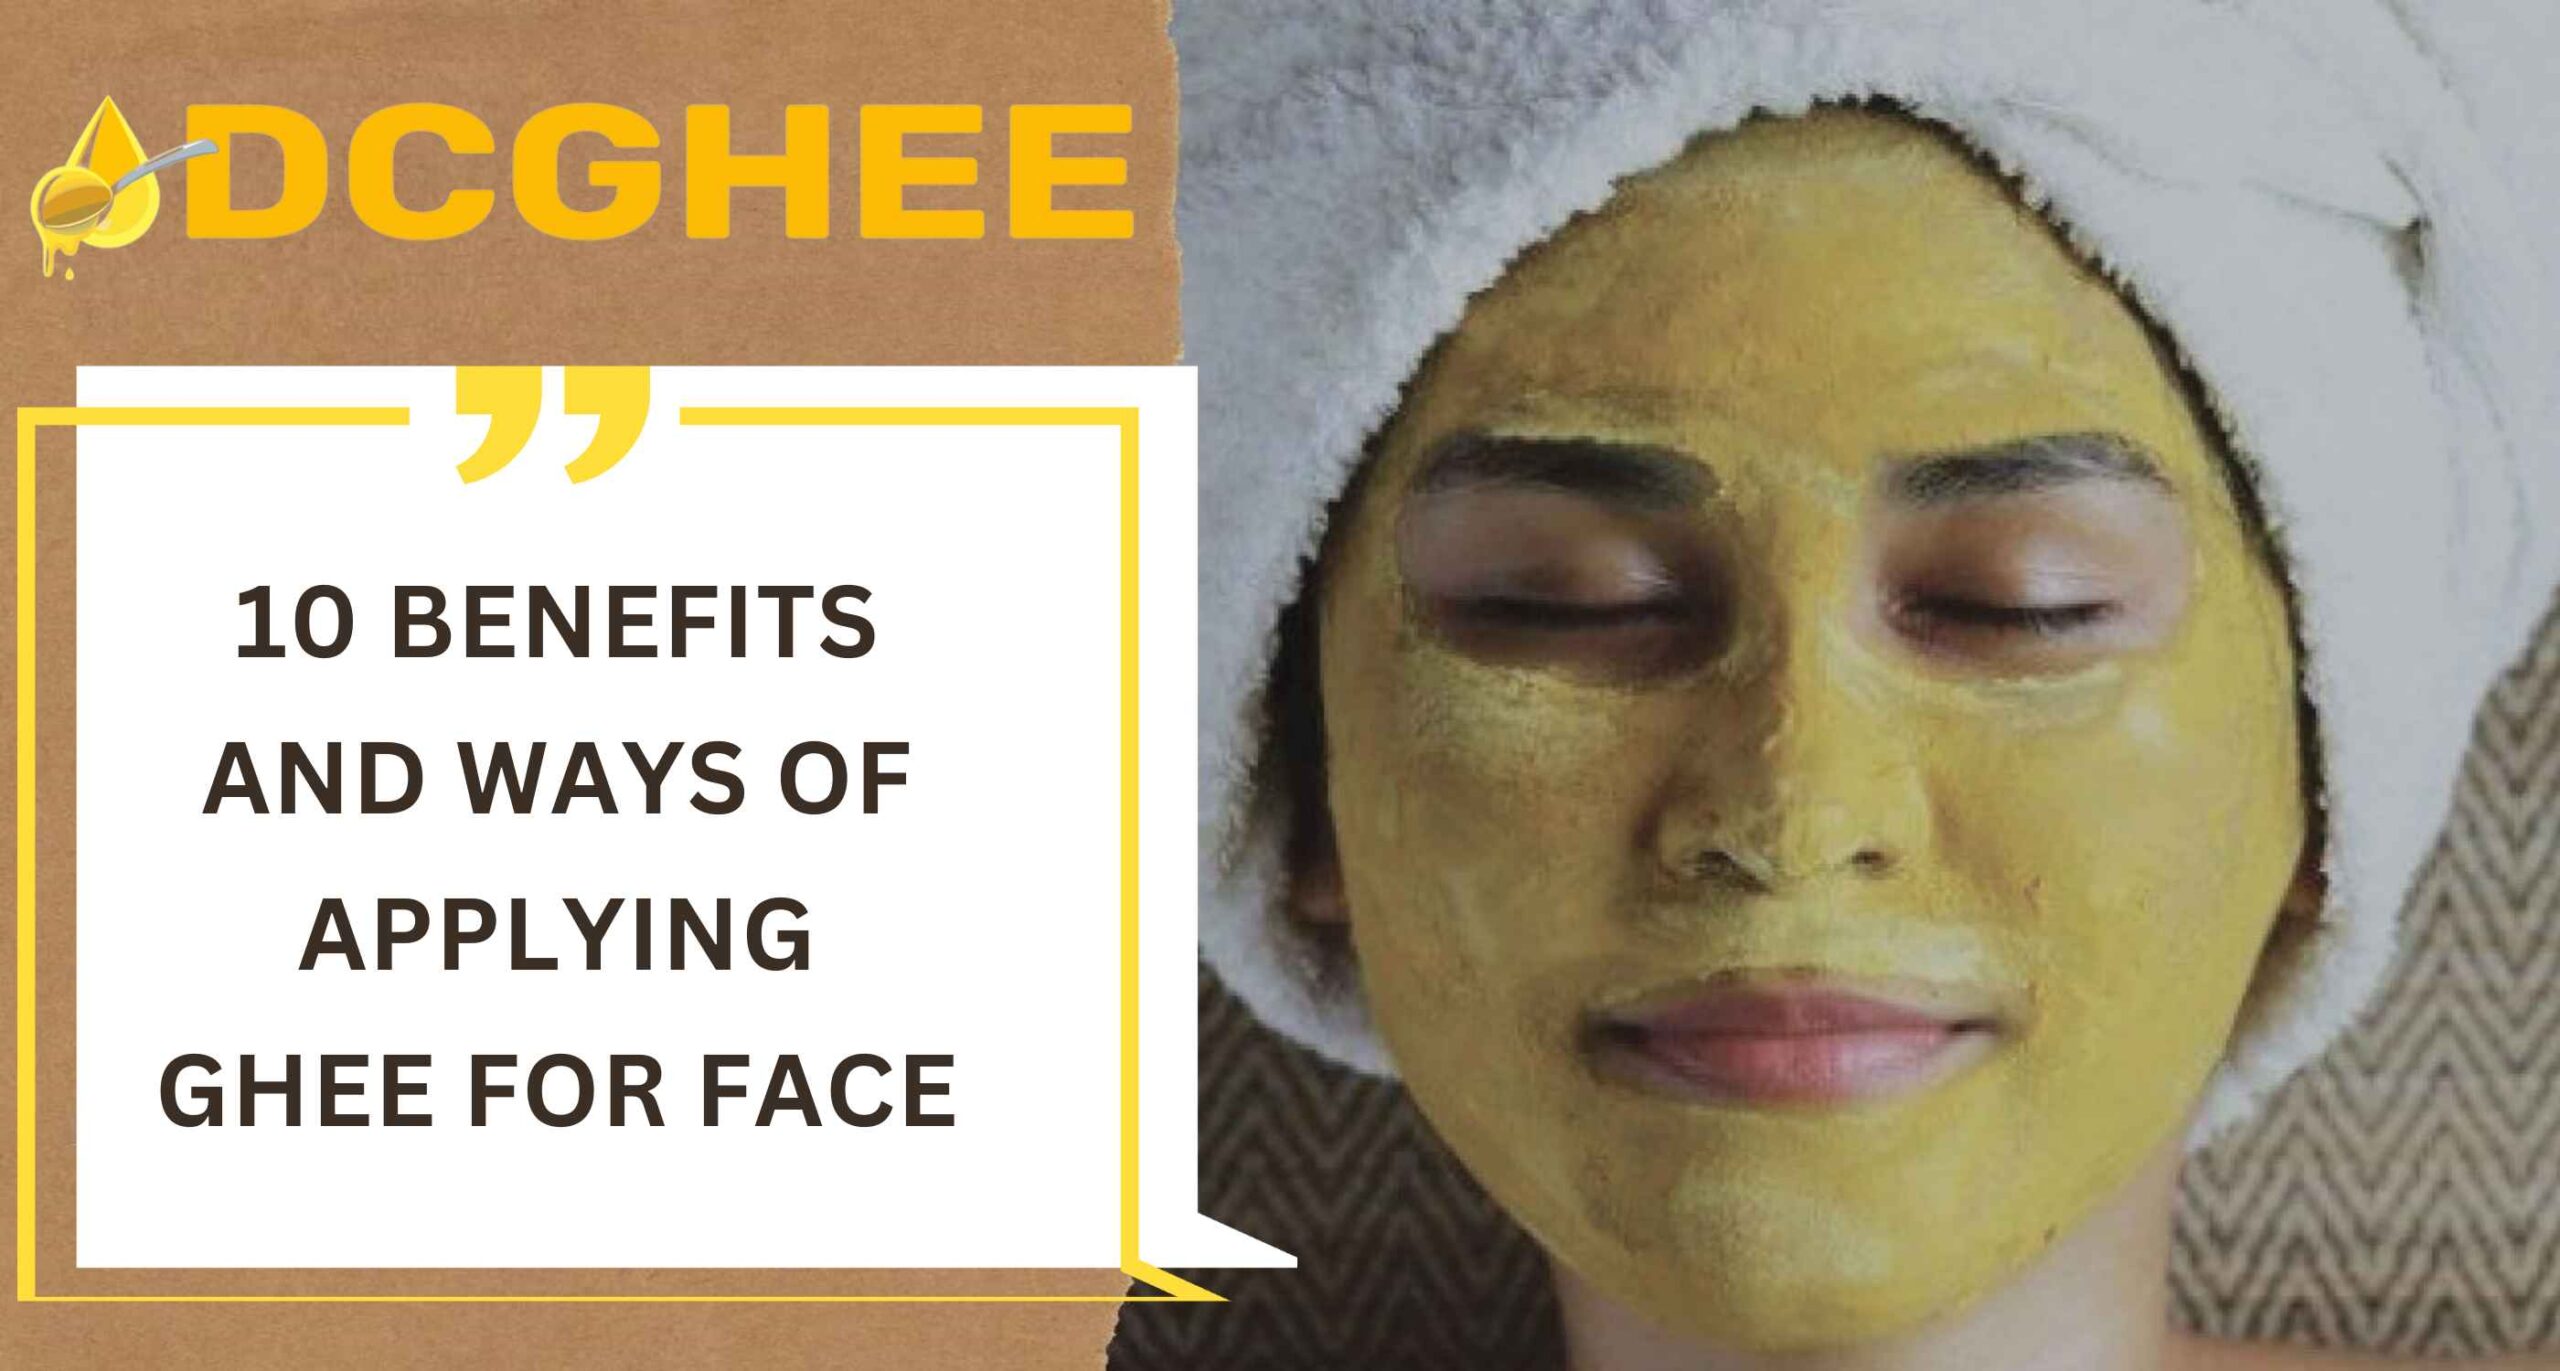 10 Benefits and Ways of Applying Ghee for Face